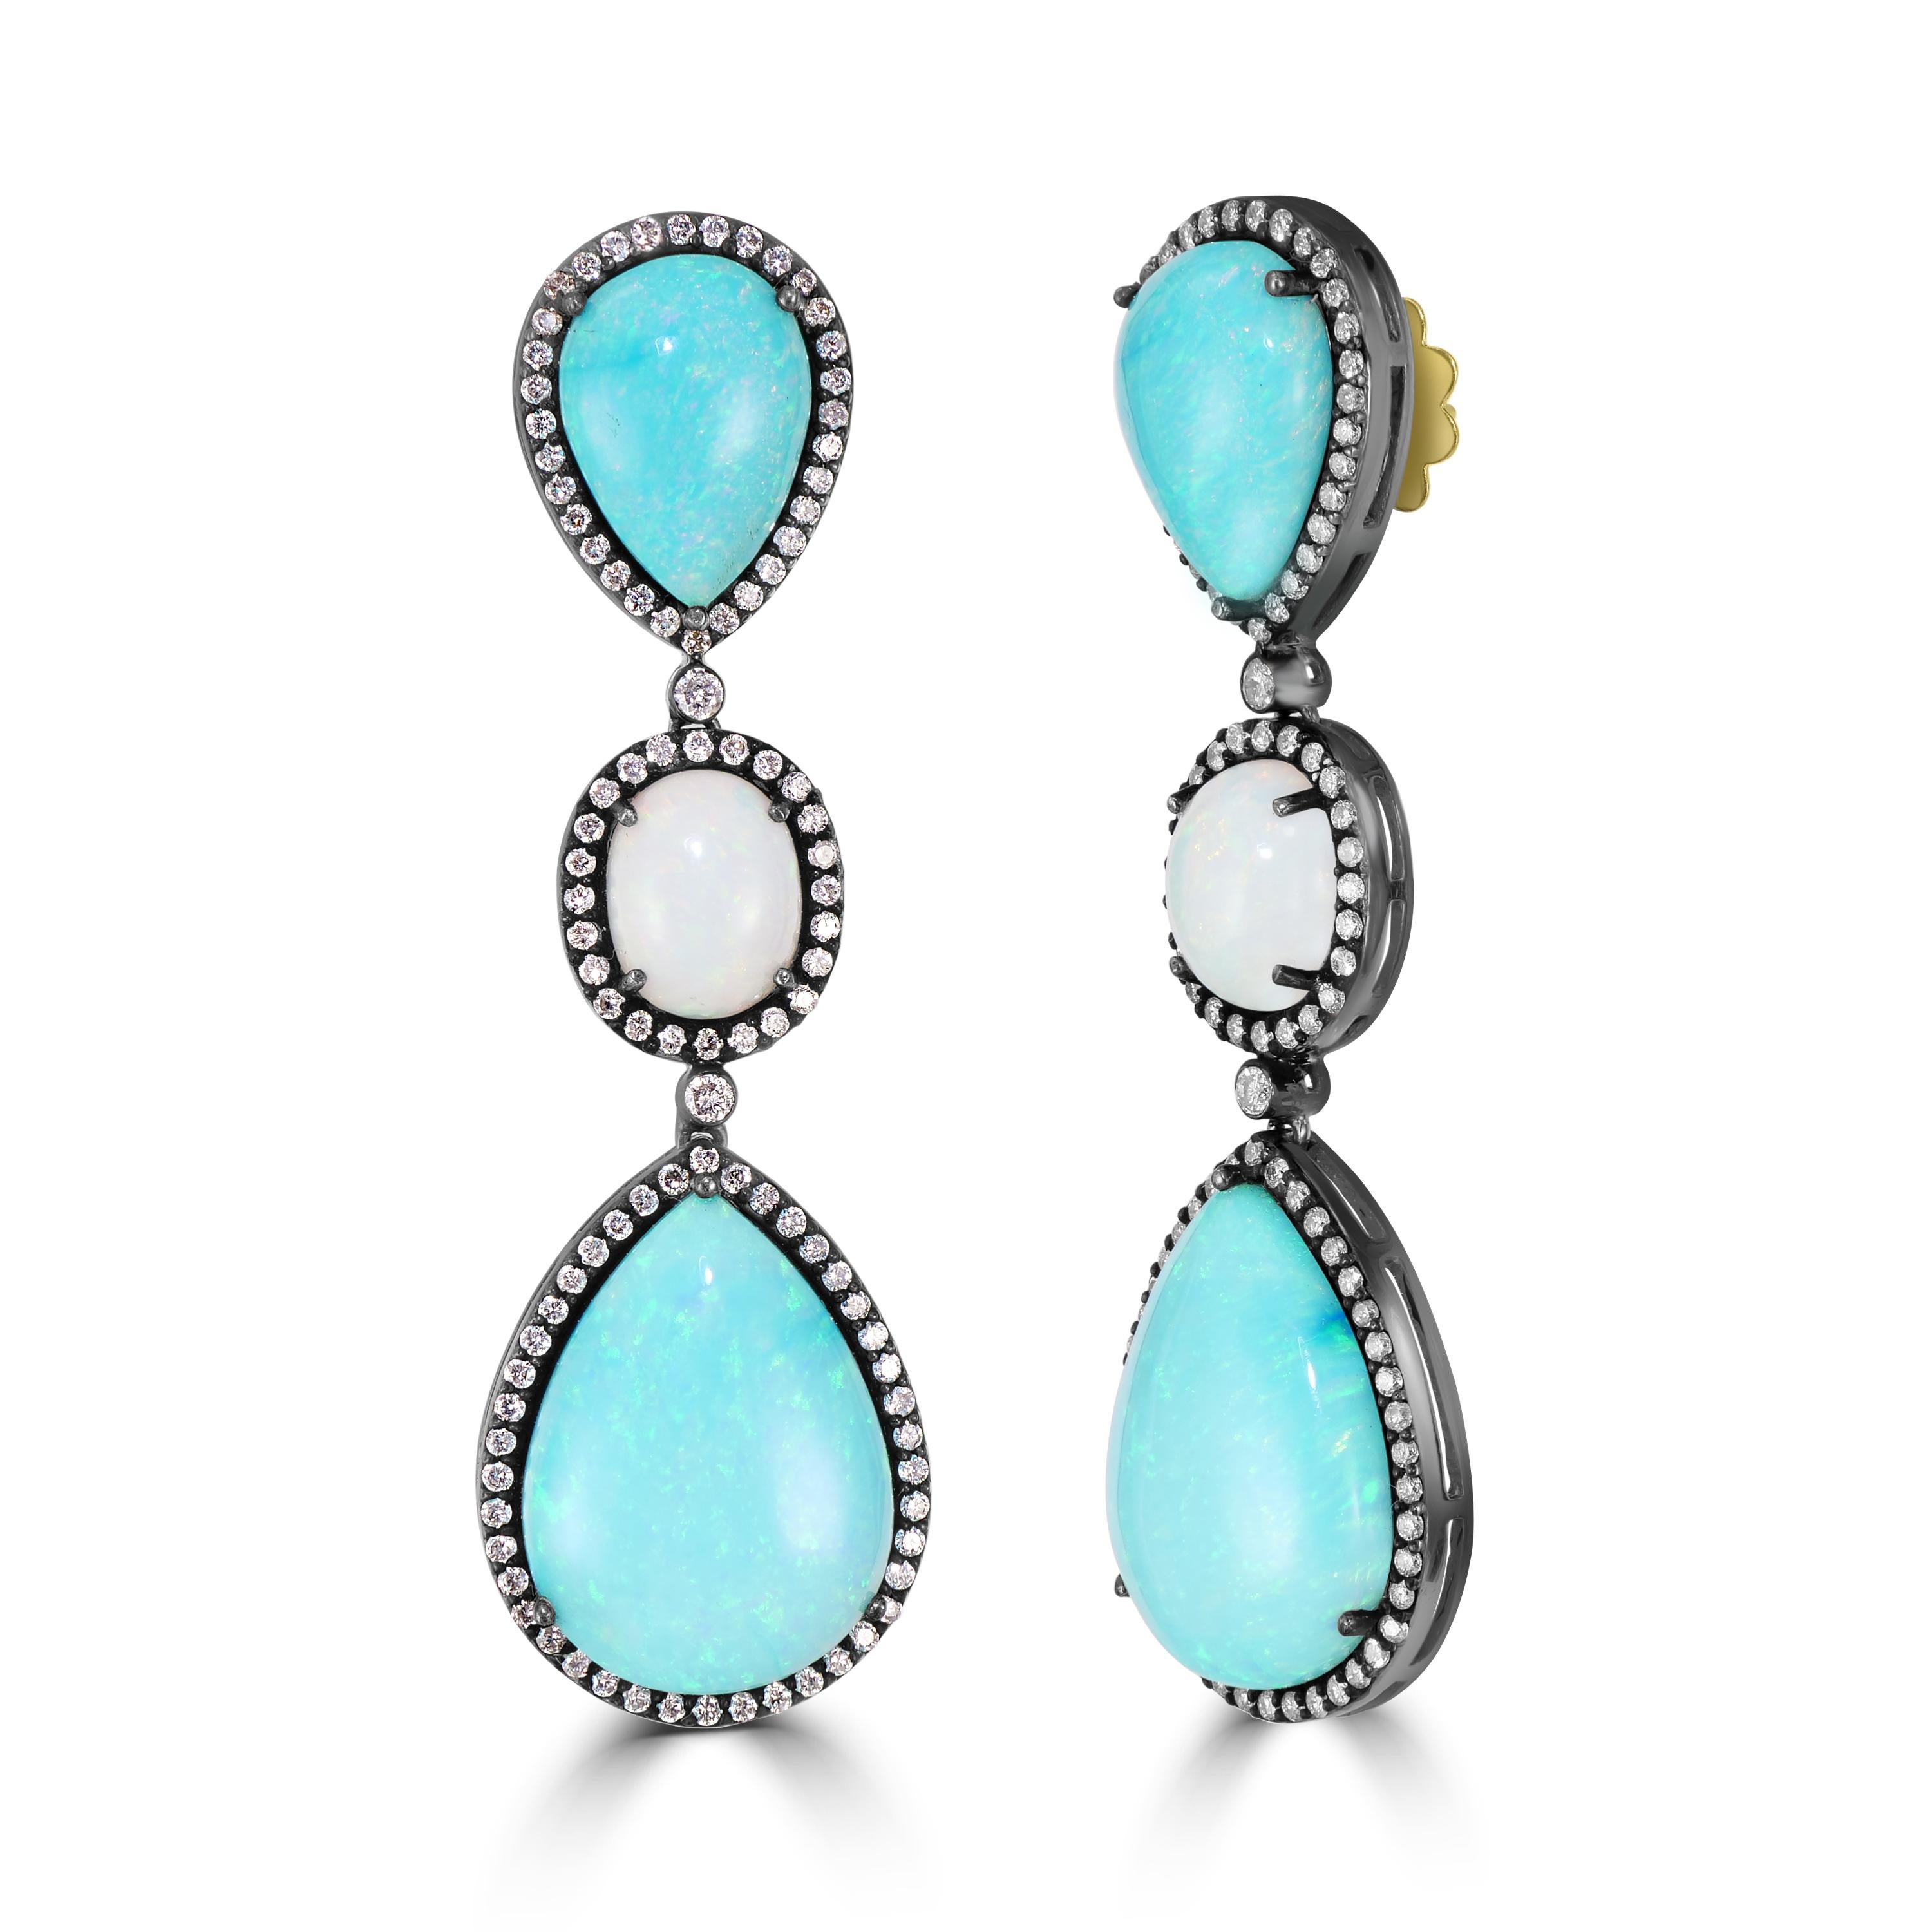 Step into the world of Victorian elegance with the mesmerizing Victorian 25.42 Cttw. Opal and Diamond Dangle Earrings in 18k/925. These earrings boast a cascade of enchanting drops, each intricately designed to showcase the beauty of opals and the